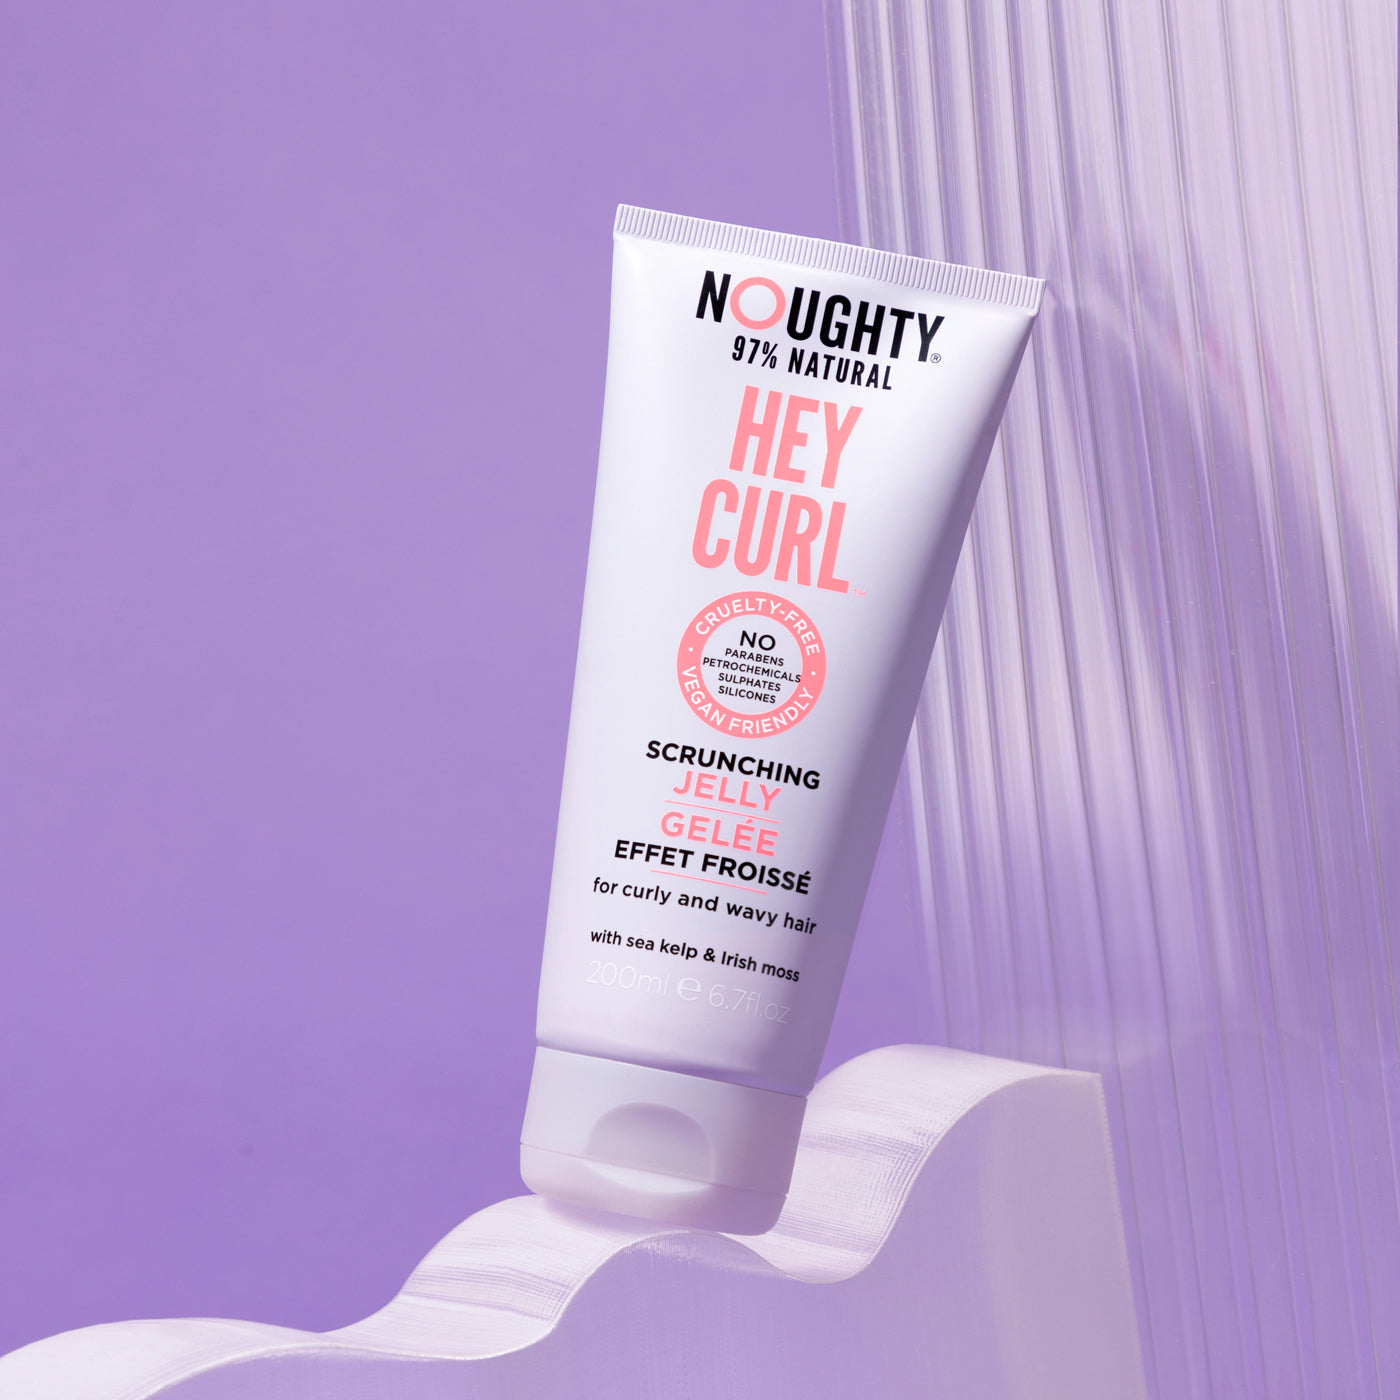 Noughty Hey Curl Scrunching Jelly for Curly and Wavy Hair